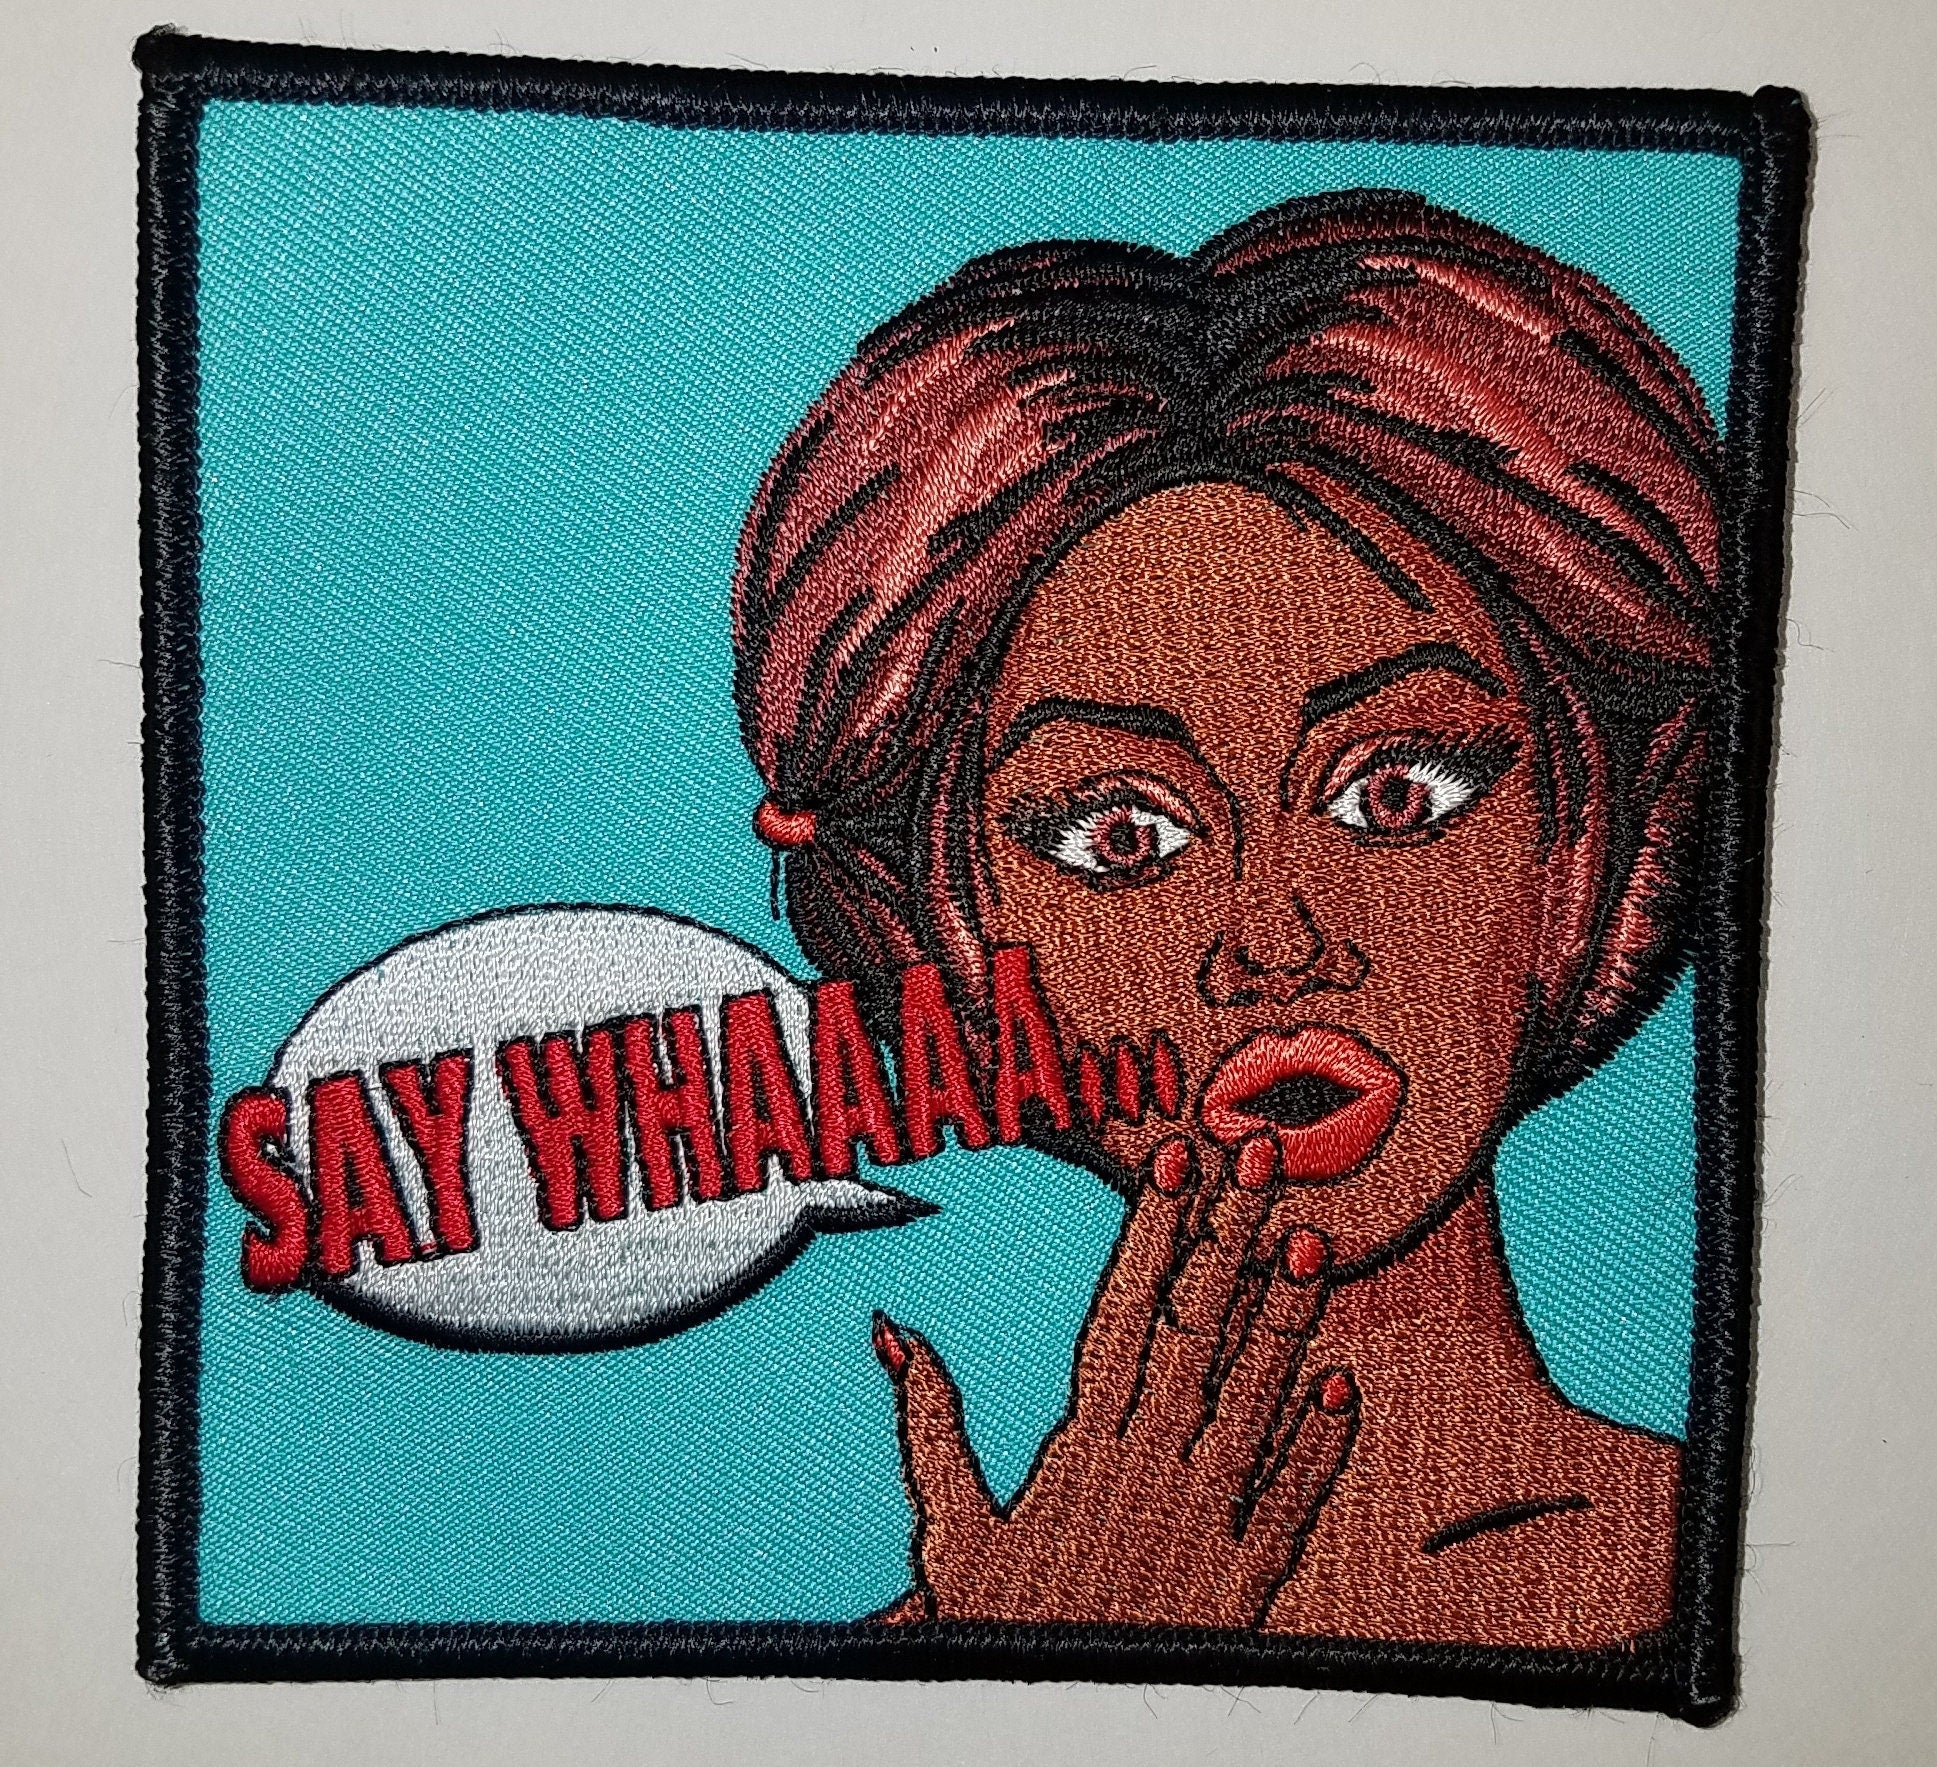 Exclusive "Say Whaaaa" Iron-on Embroidered 3D Patch; Cool Statement Applique for clothing